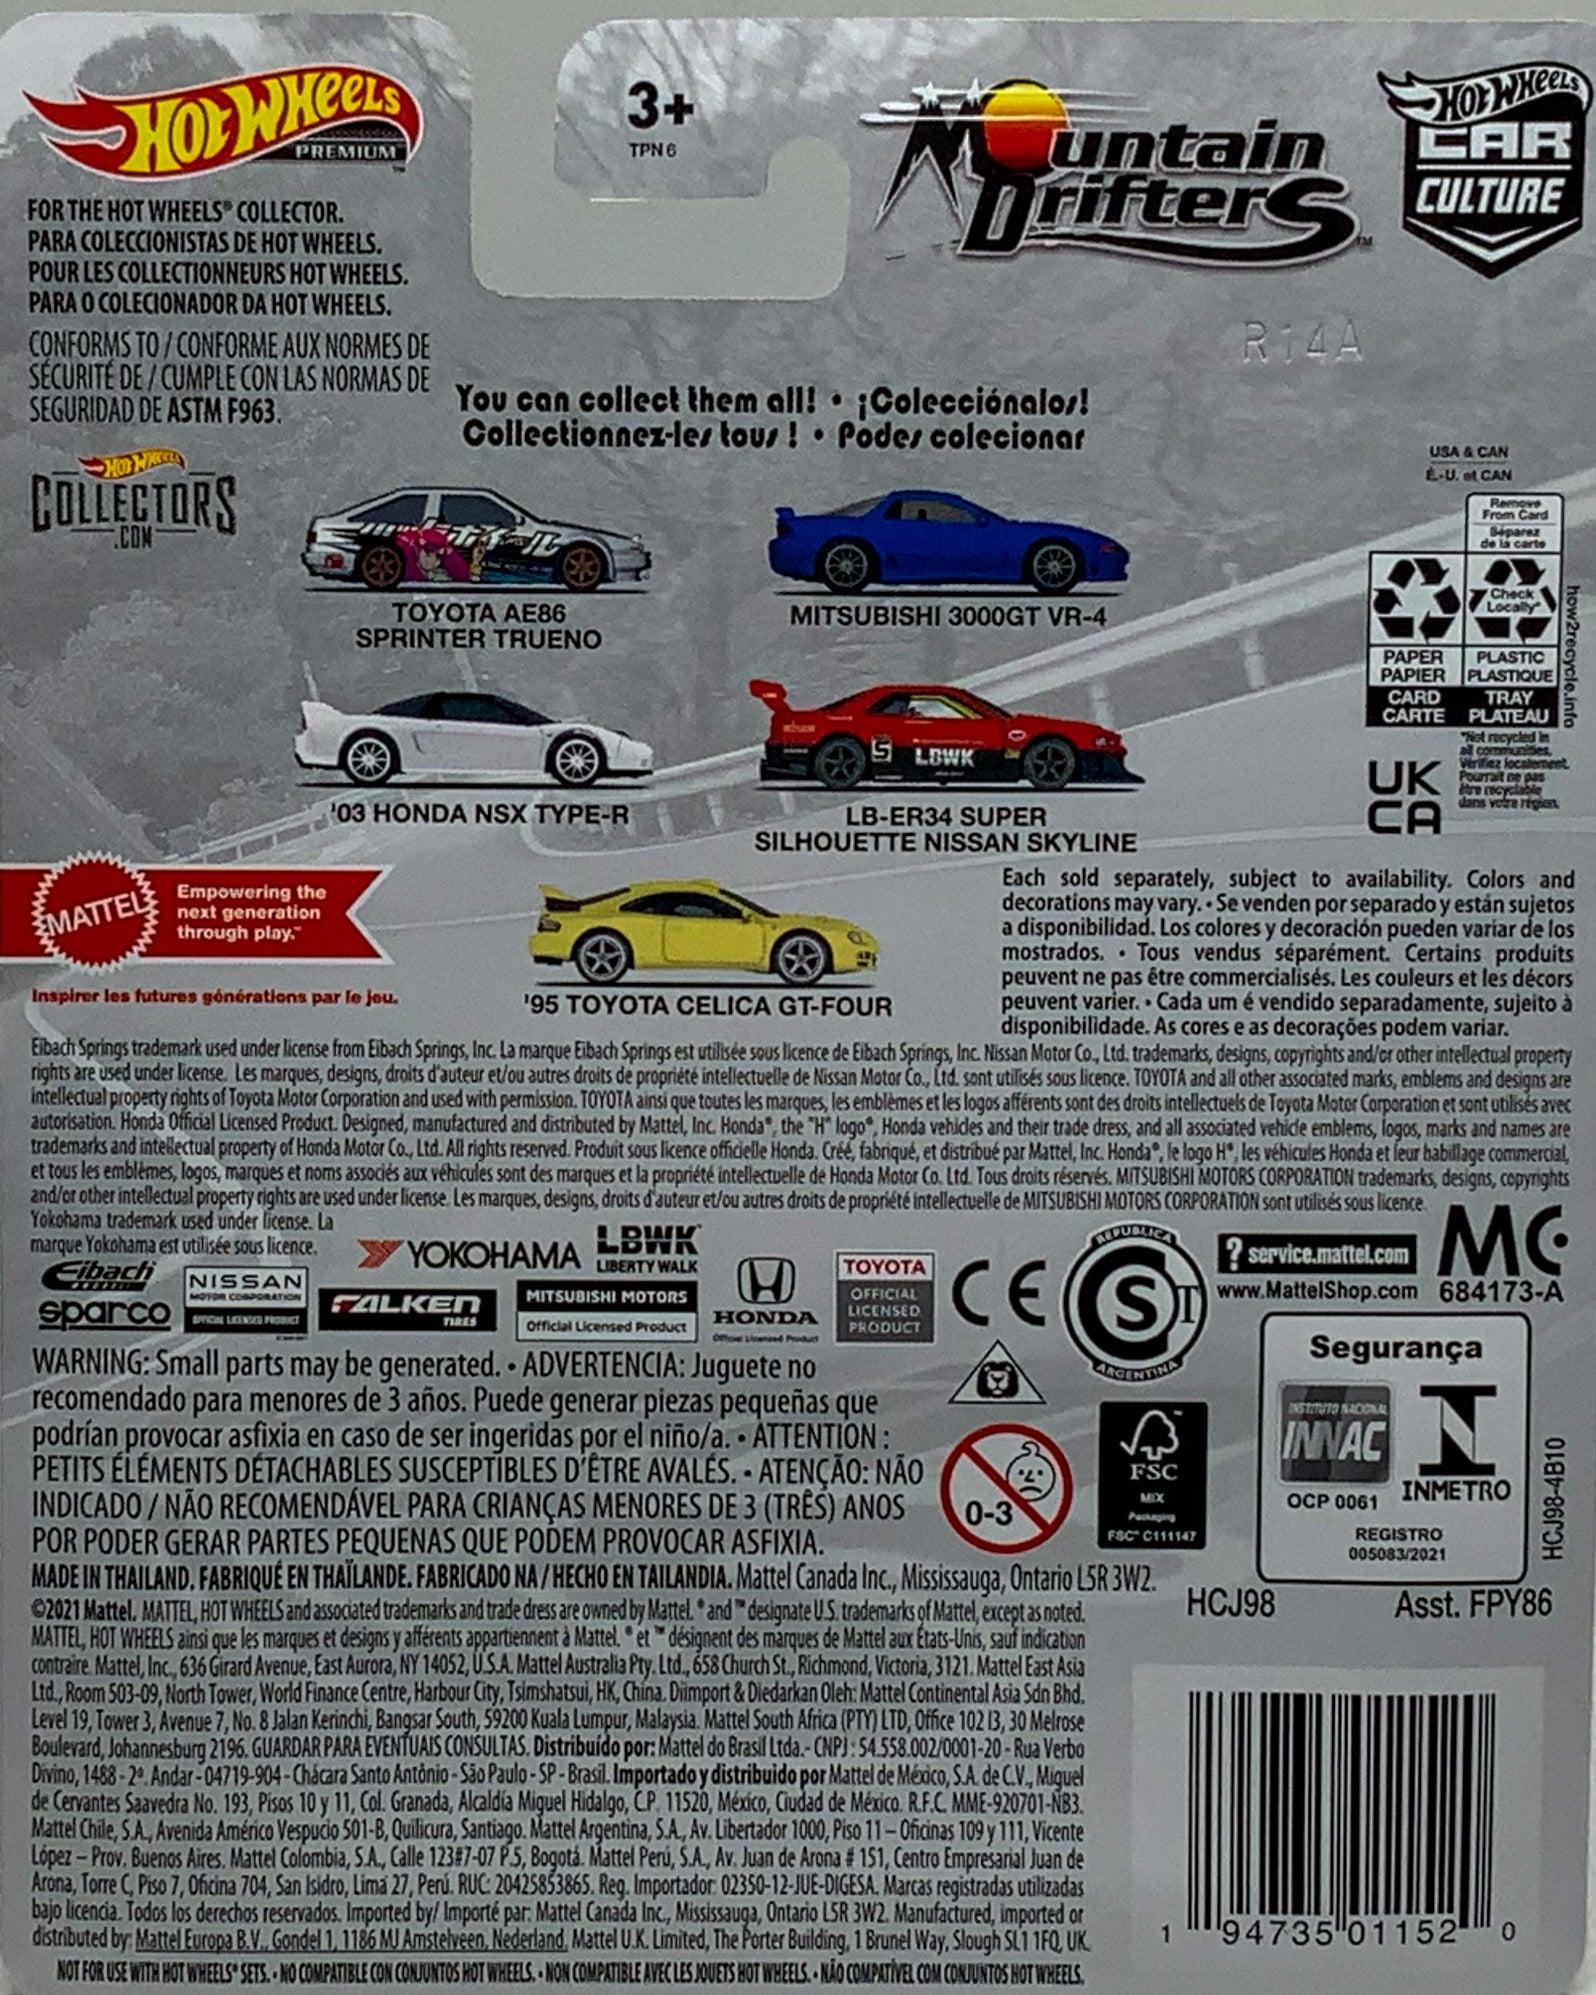 Buy at Tatoyshop.com Back of the Card shows the 5 Cars on Series Toyota, Mitsubishi, Honda, Nissan, Toyota Premium Collections